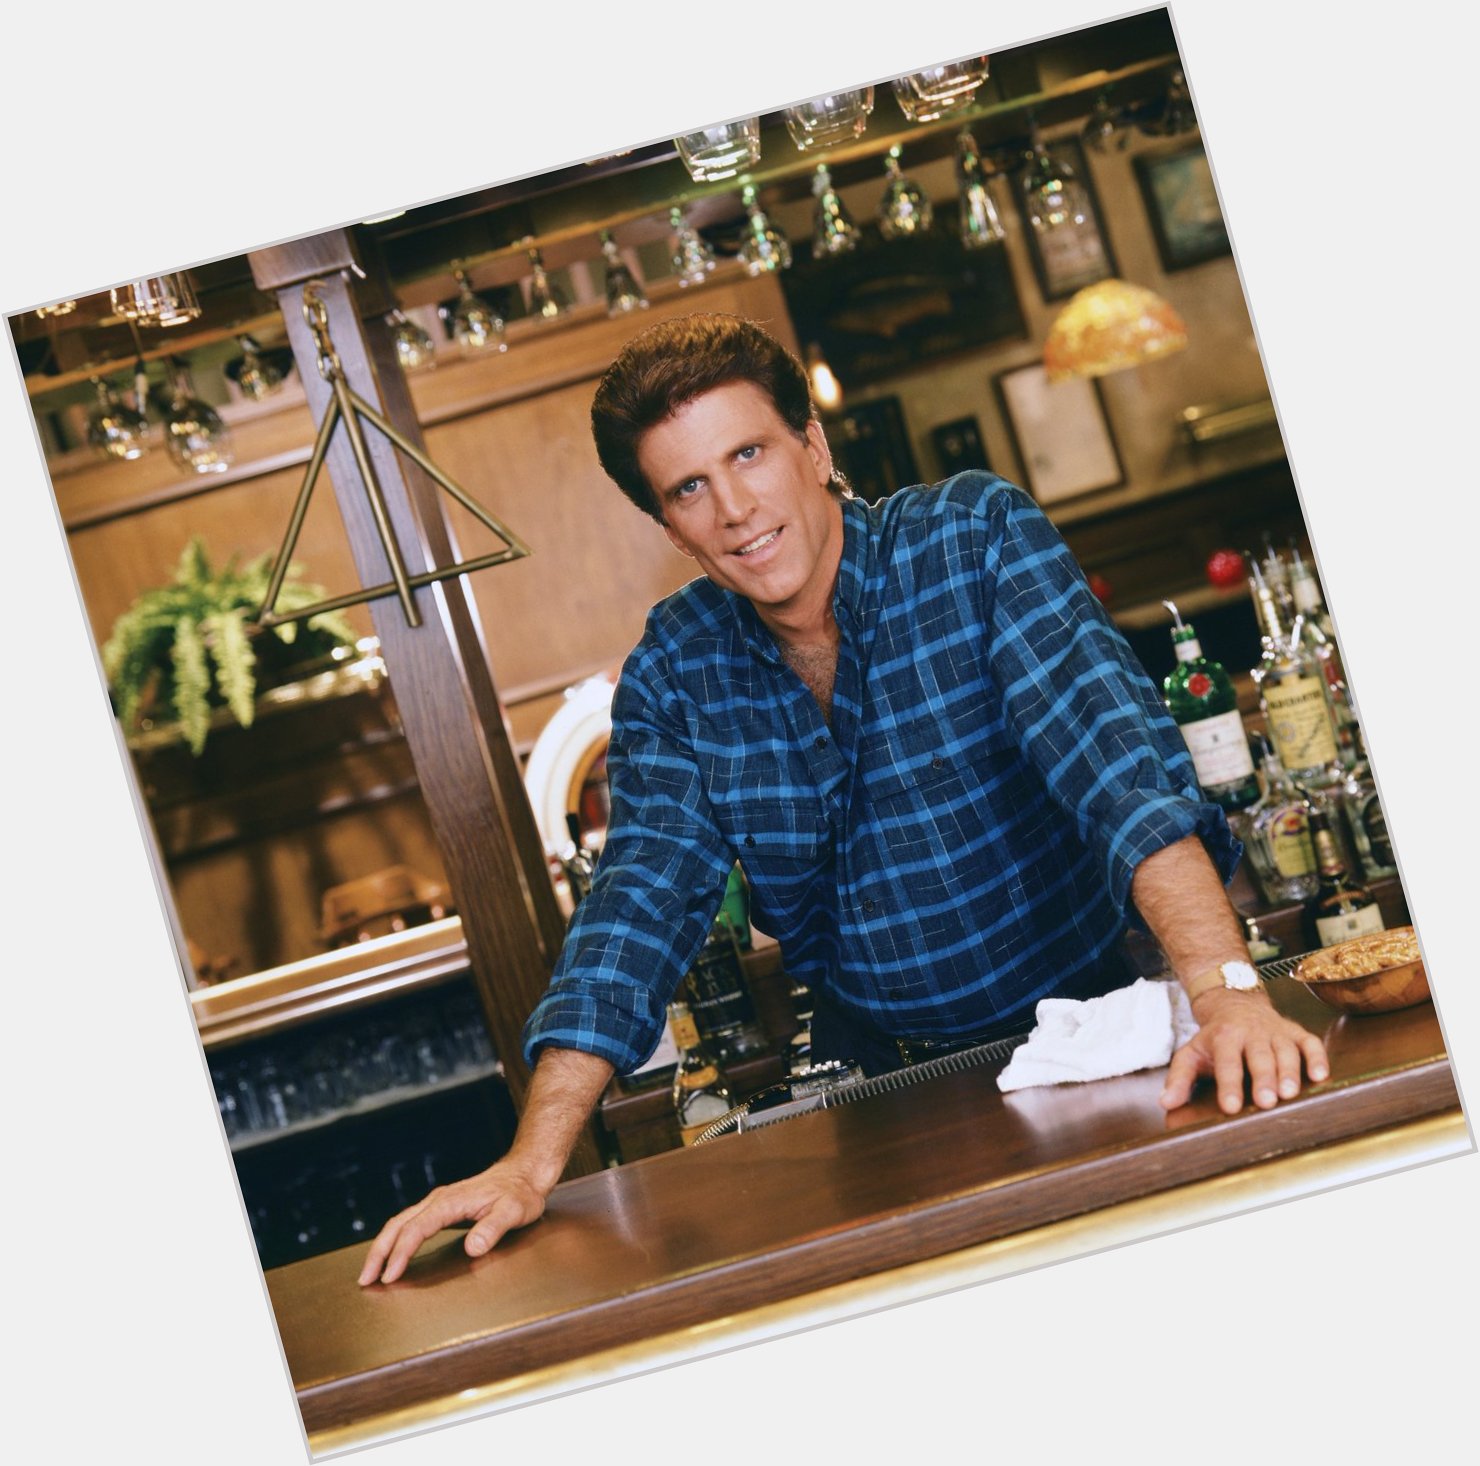 Happy Birthday American actor Ted Danson, now 75 years old. Brilliant as Sam Malone in Cheers 1982-1993. 